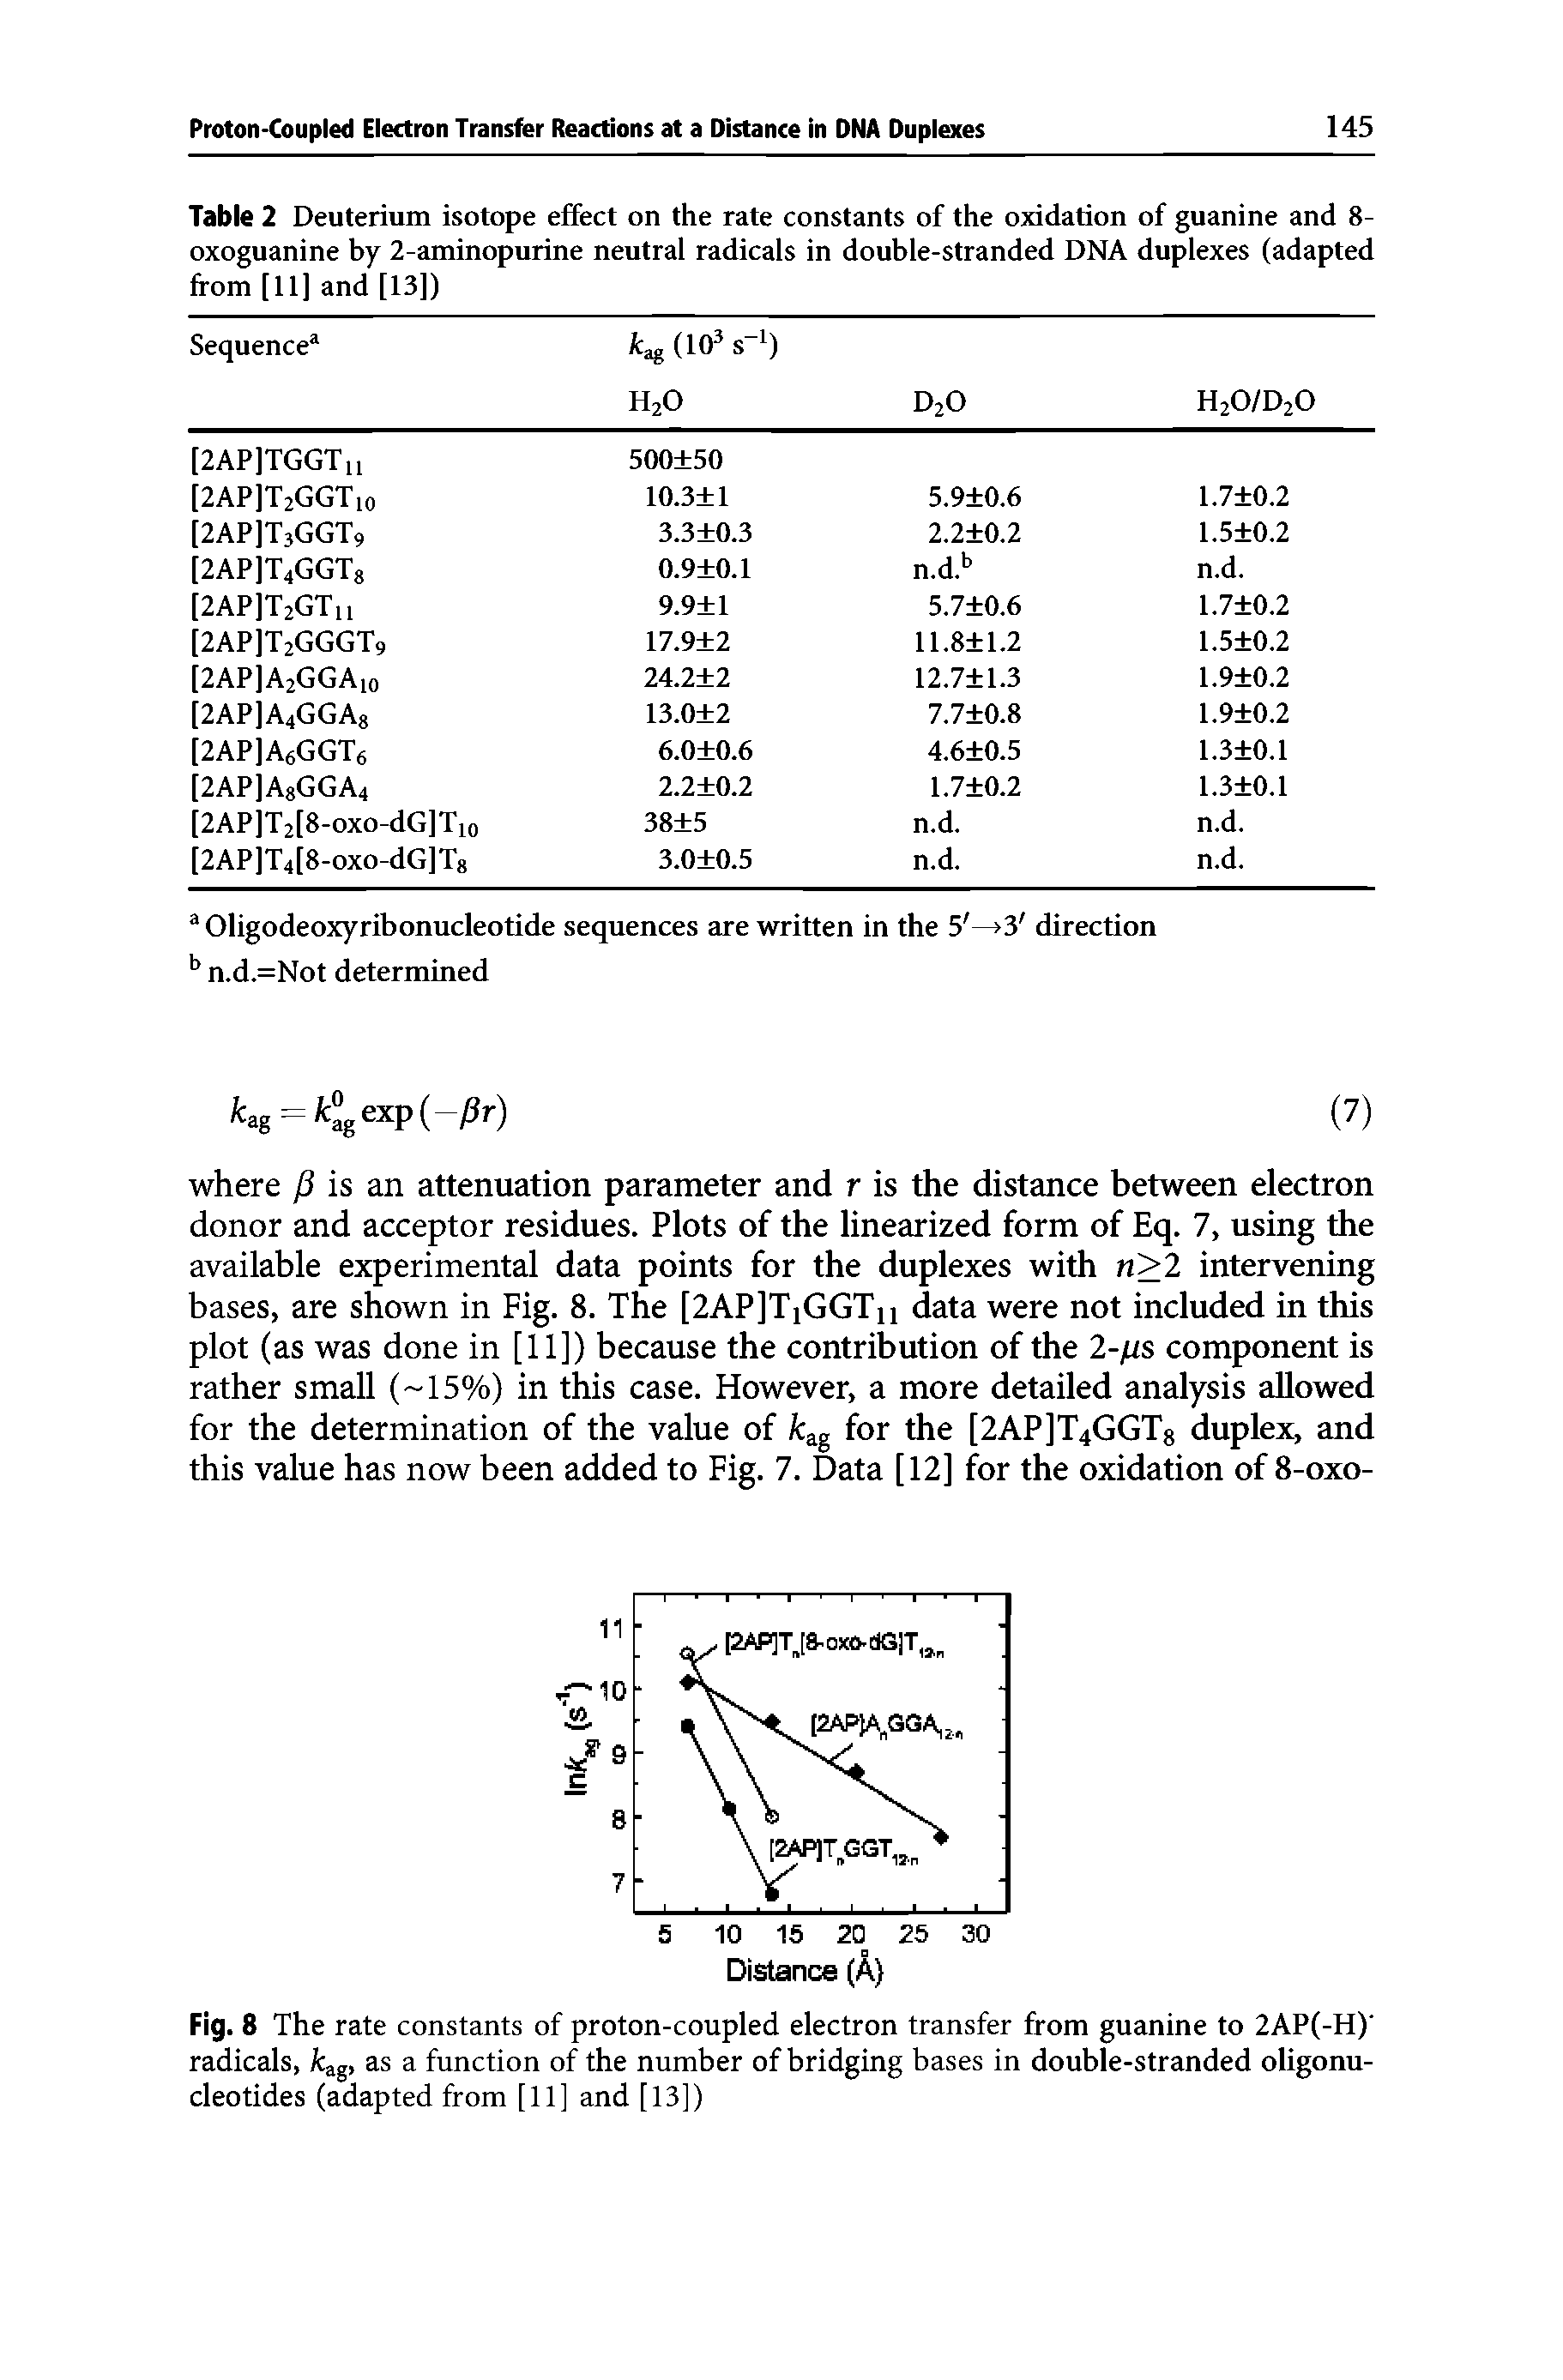 Table 2 Deuterium isotope effect on the rate constants of the oxidation of guanine and 8-oxoguanine by 2-aminopurine neutral radicals in double-stranded DNA duplexes (adapted from [11] and [13]) ...